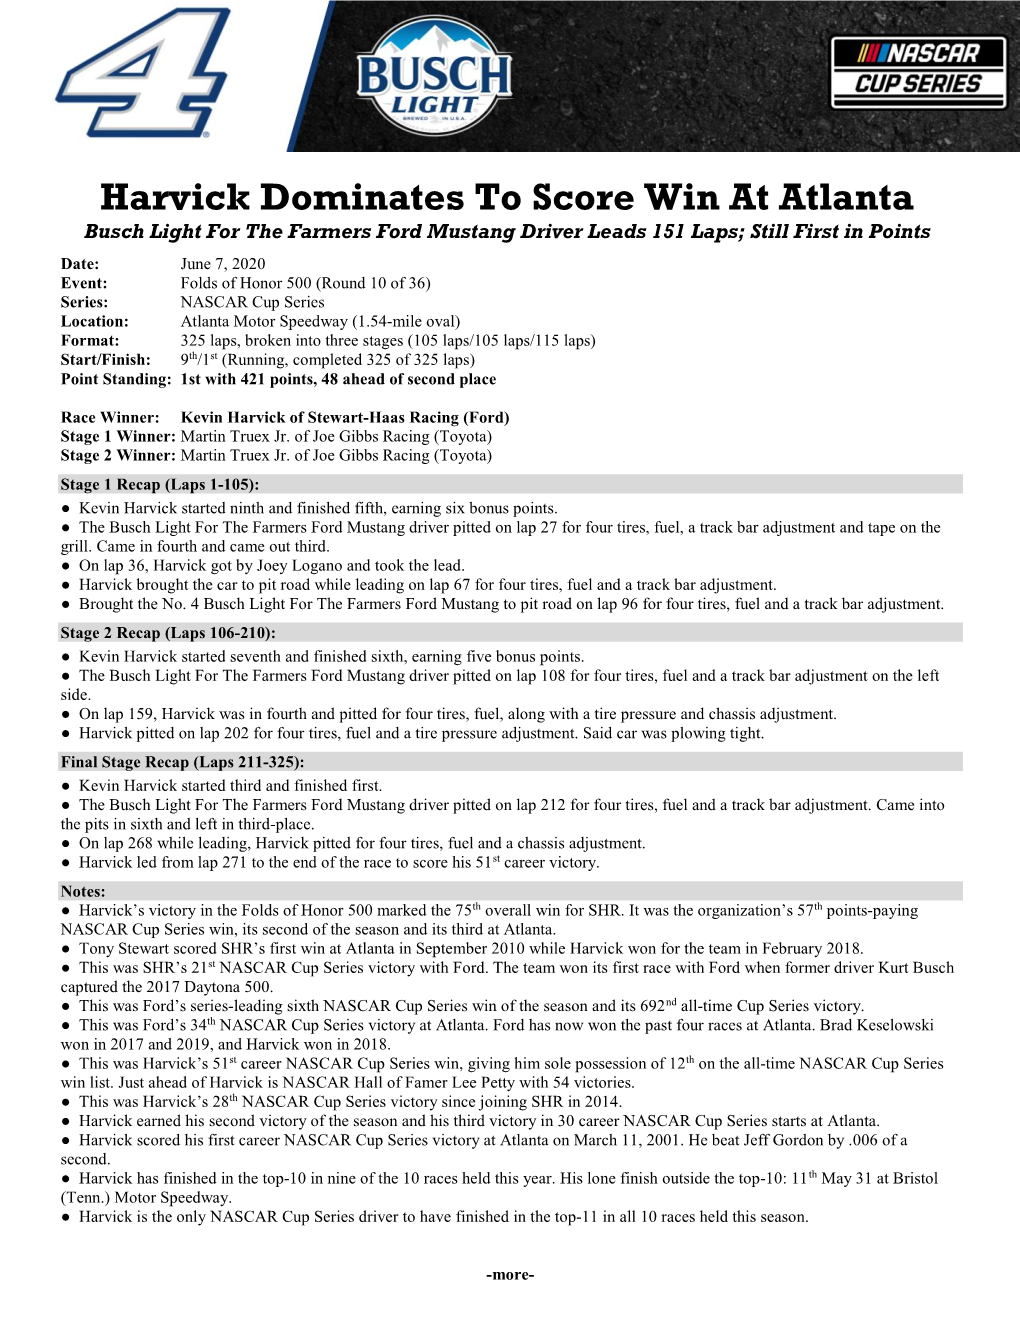 Harvick Dominates to Score Win at Atlanta Busch Light for the Farmers Ford Mustang Driver Leads 151 Laps; Still First in Points